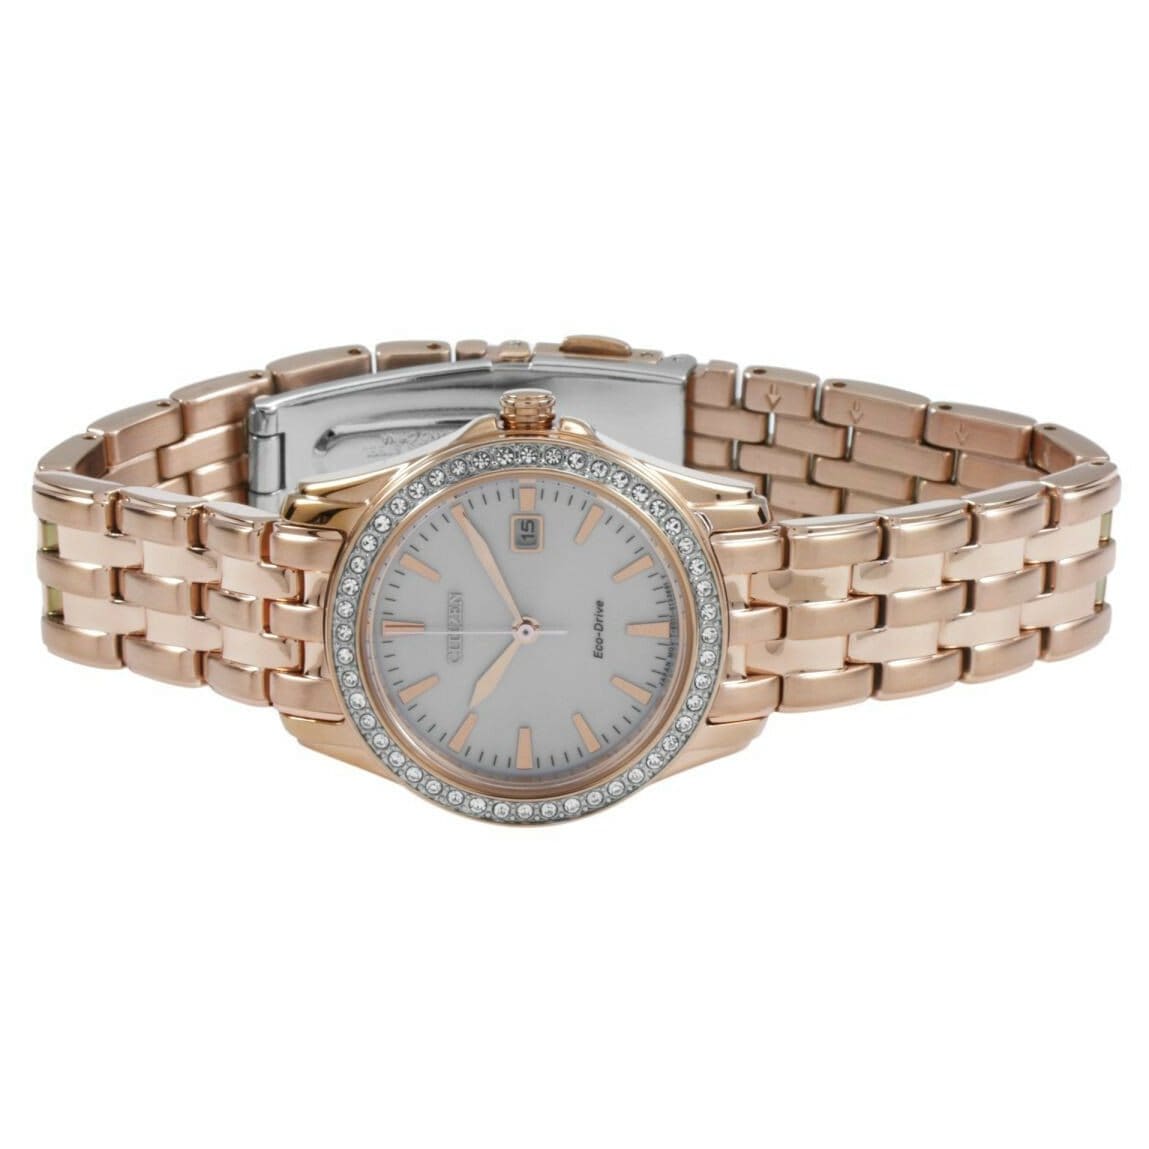 Citizen Eco-Drive EW1903-52A Ladies Silhouette Crystal Rose Goldtone Stainless Steel Watch 013205107962